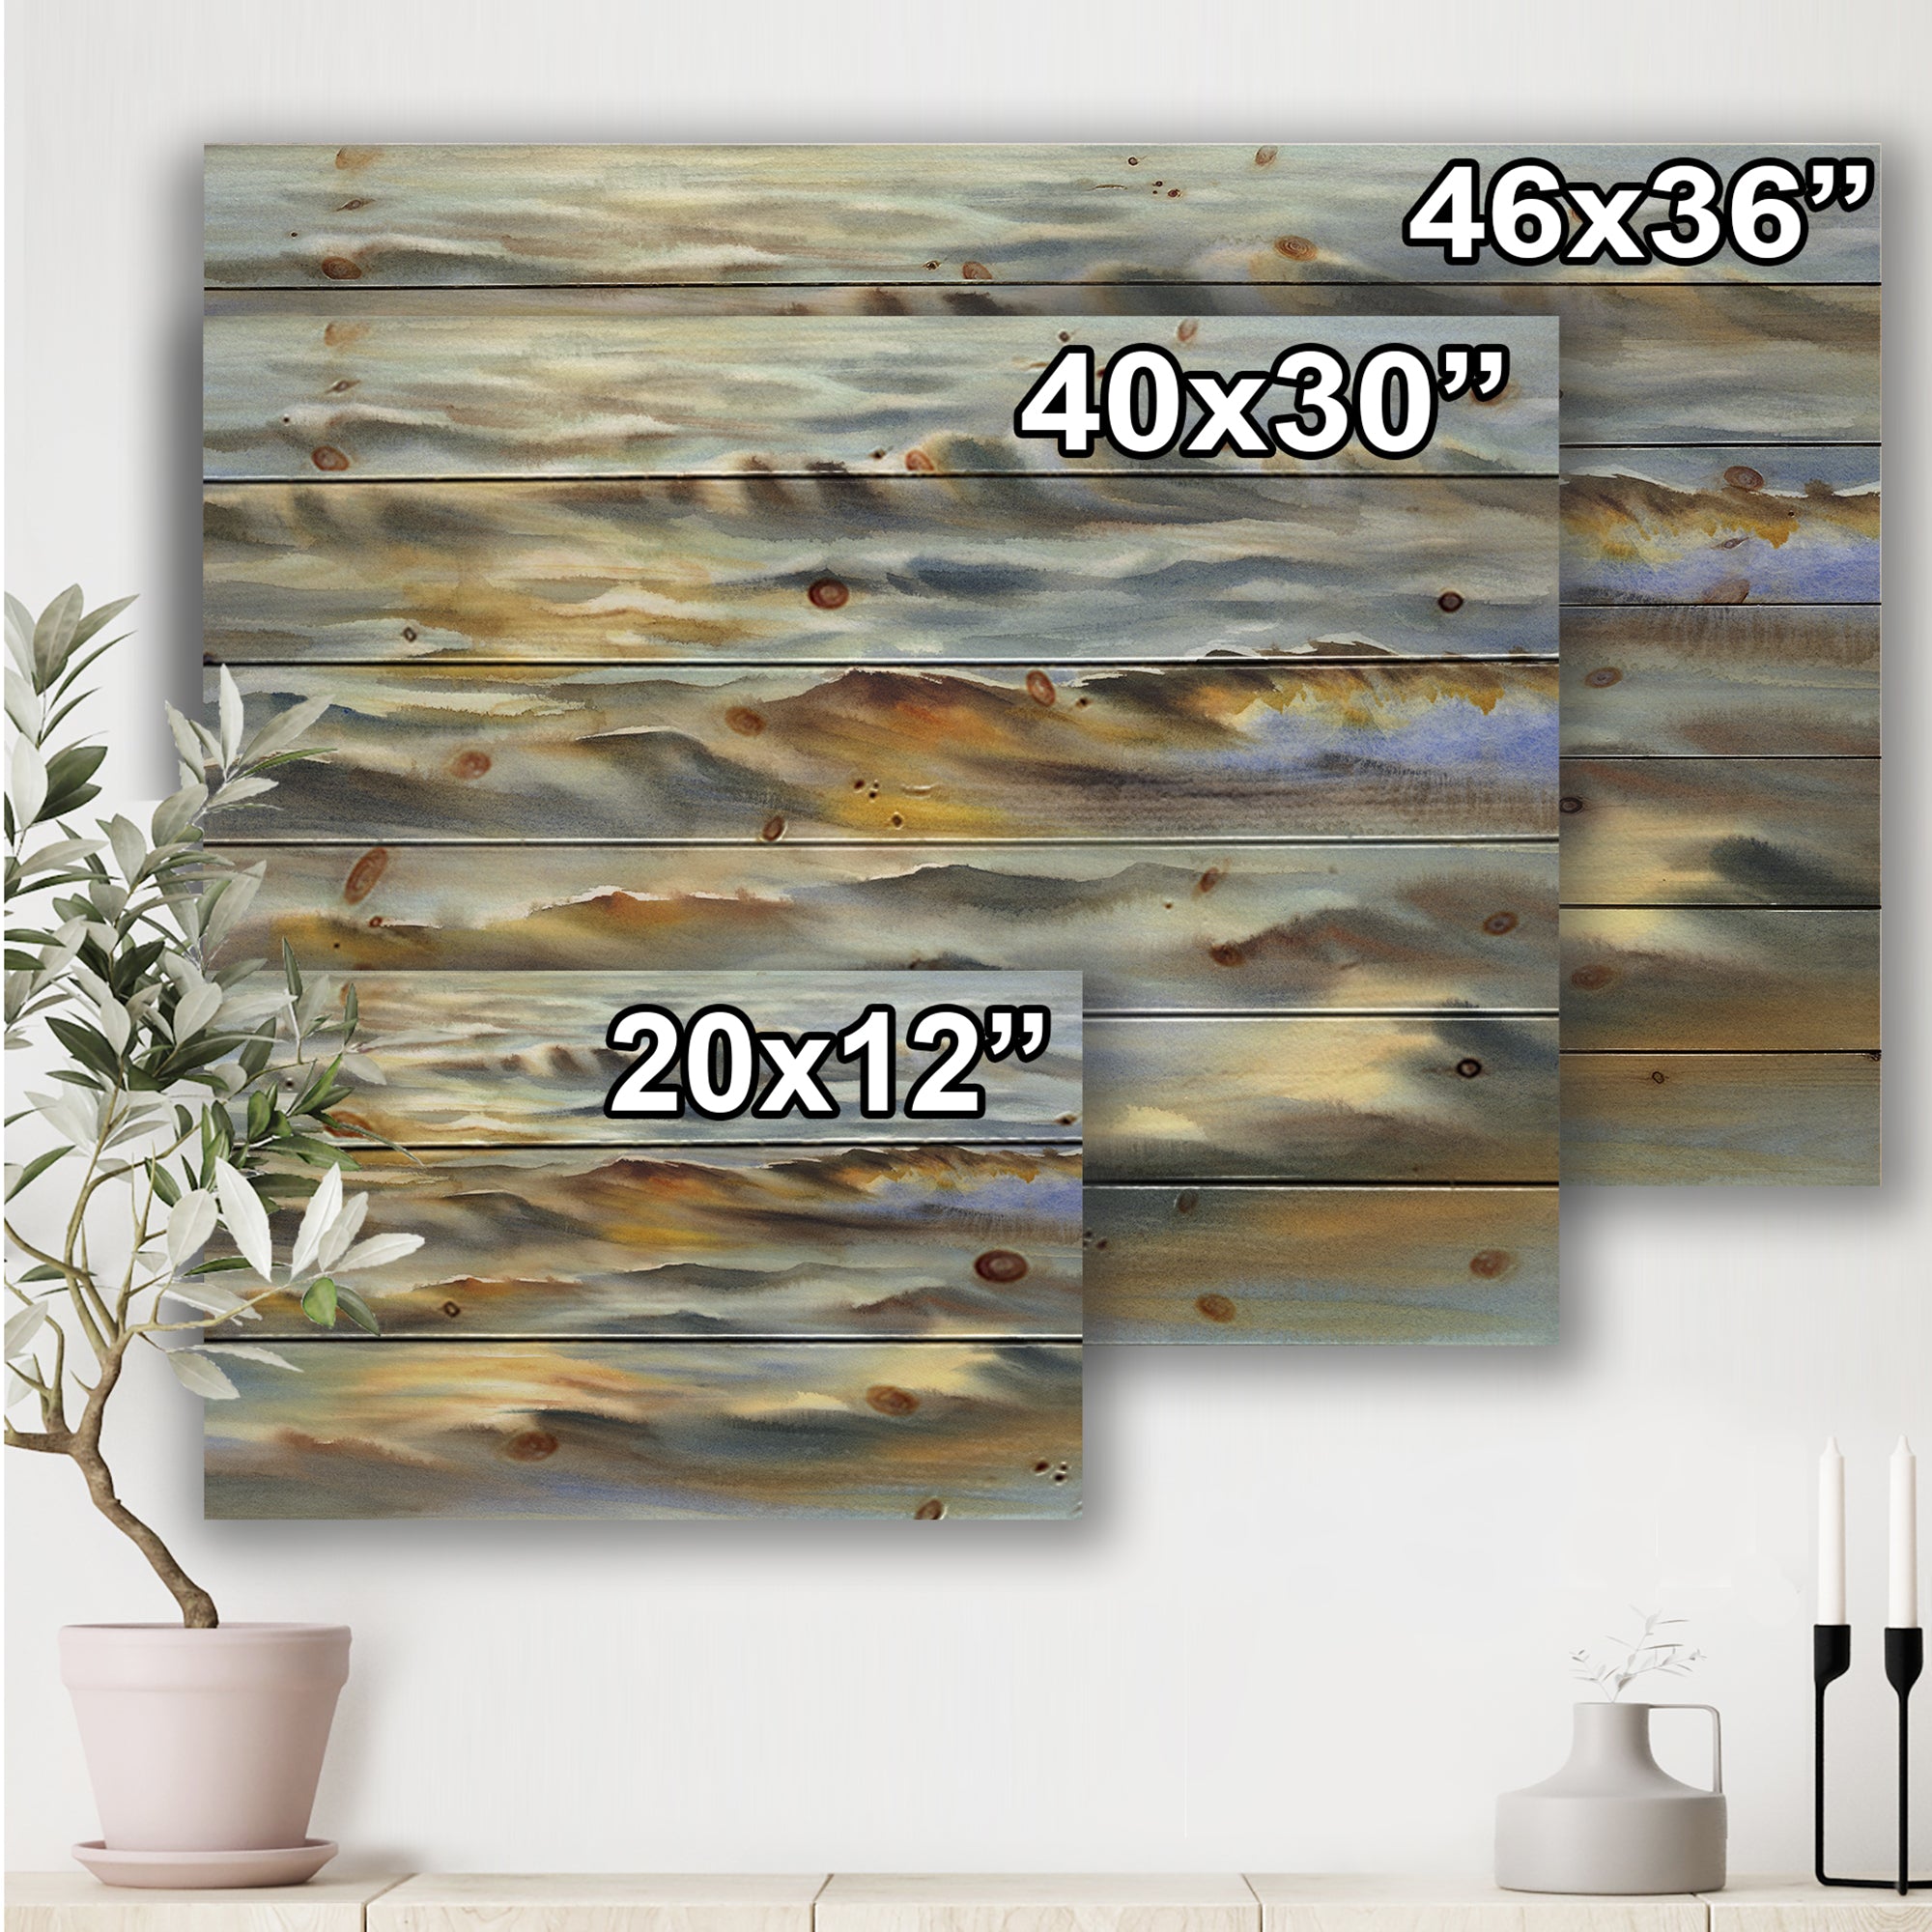 Sunlight Reflections Of Evening Time Waves - Lakehouse Print on Natural Pine Wood